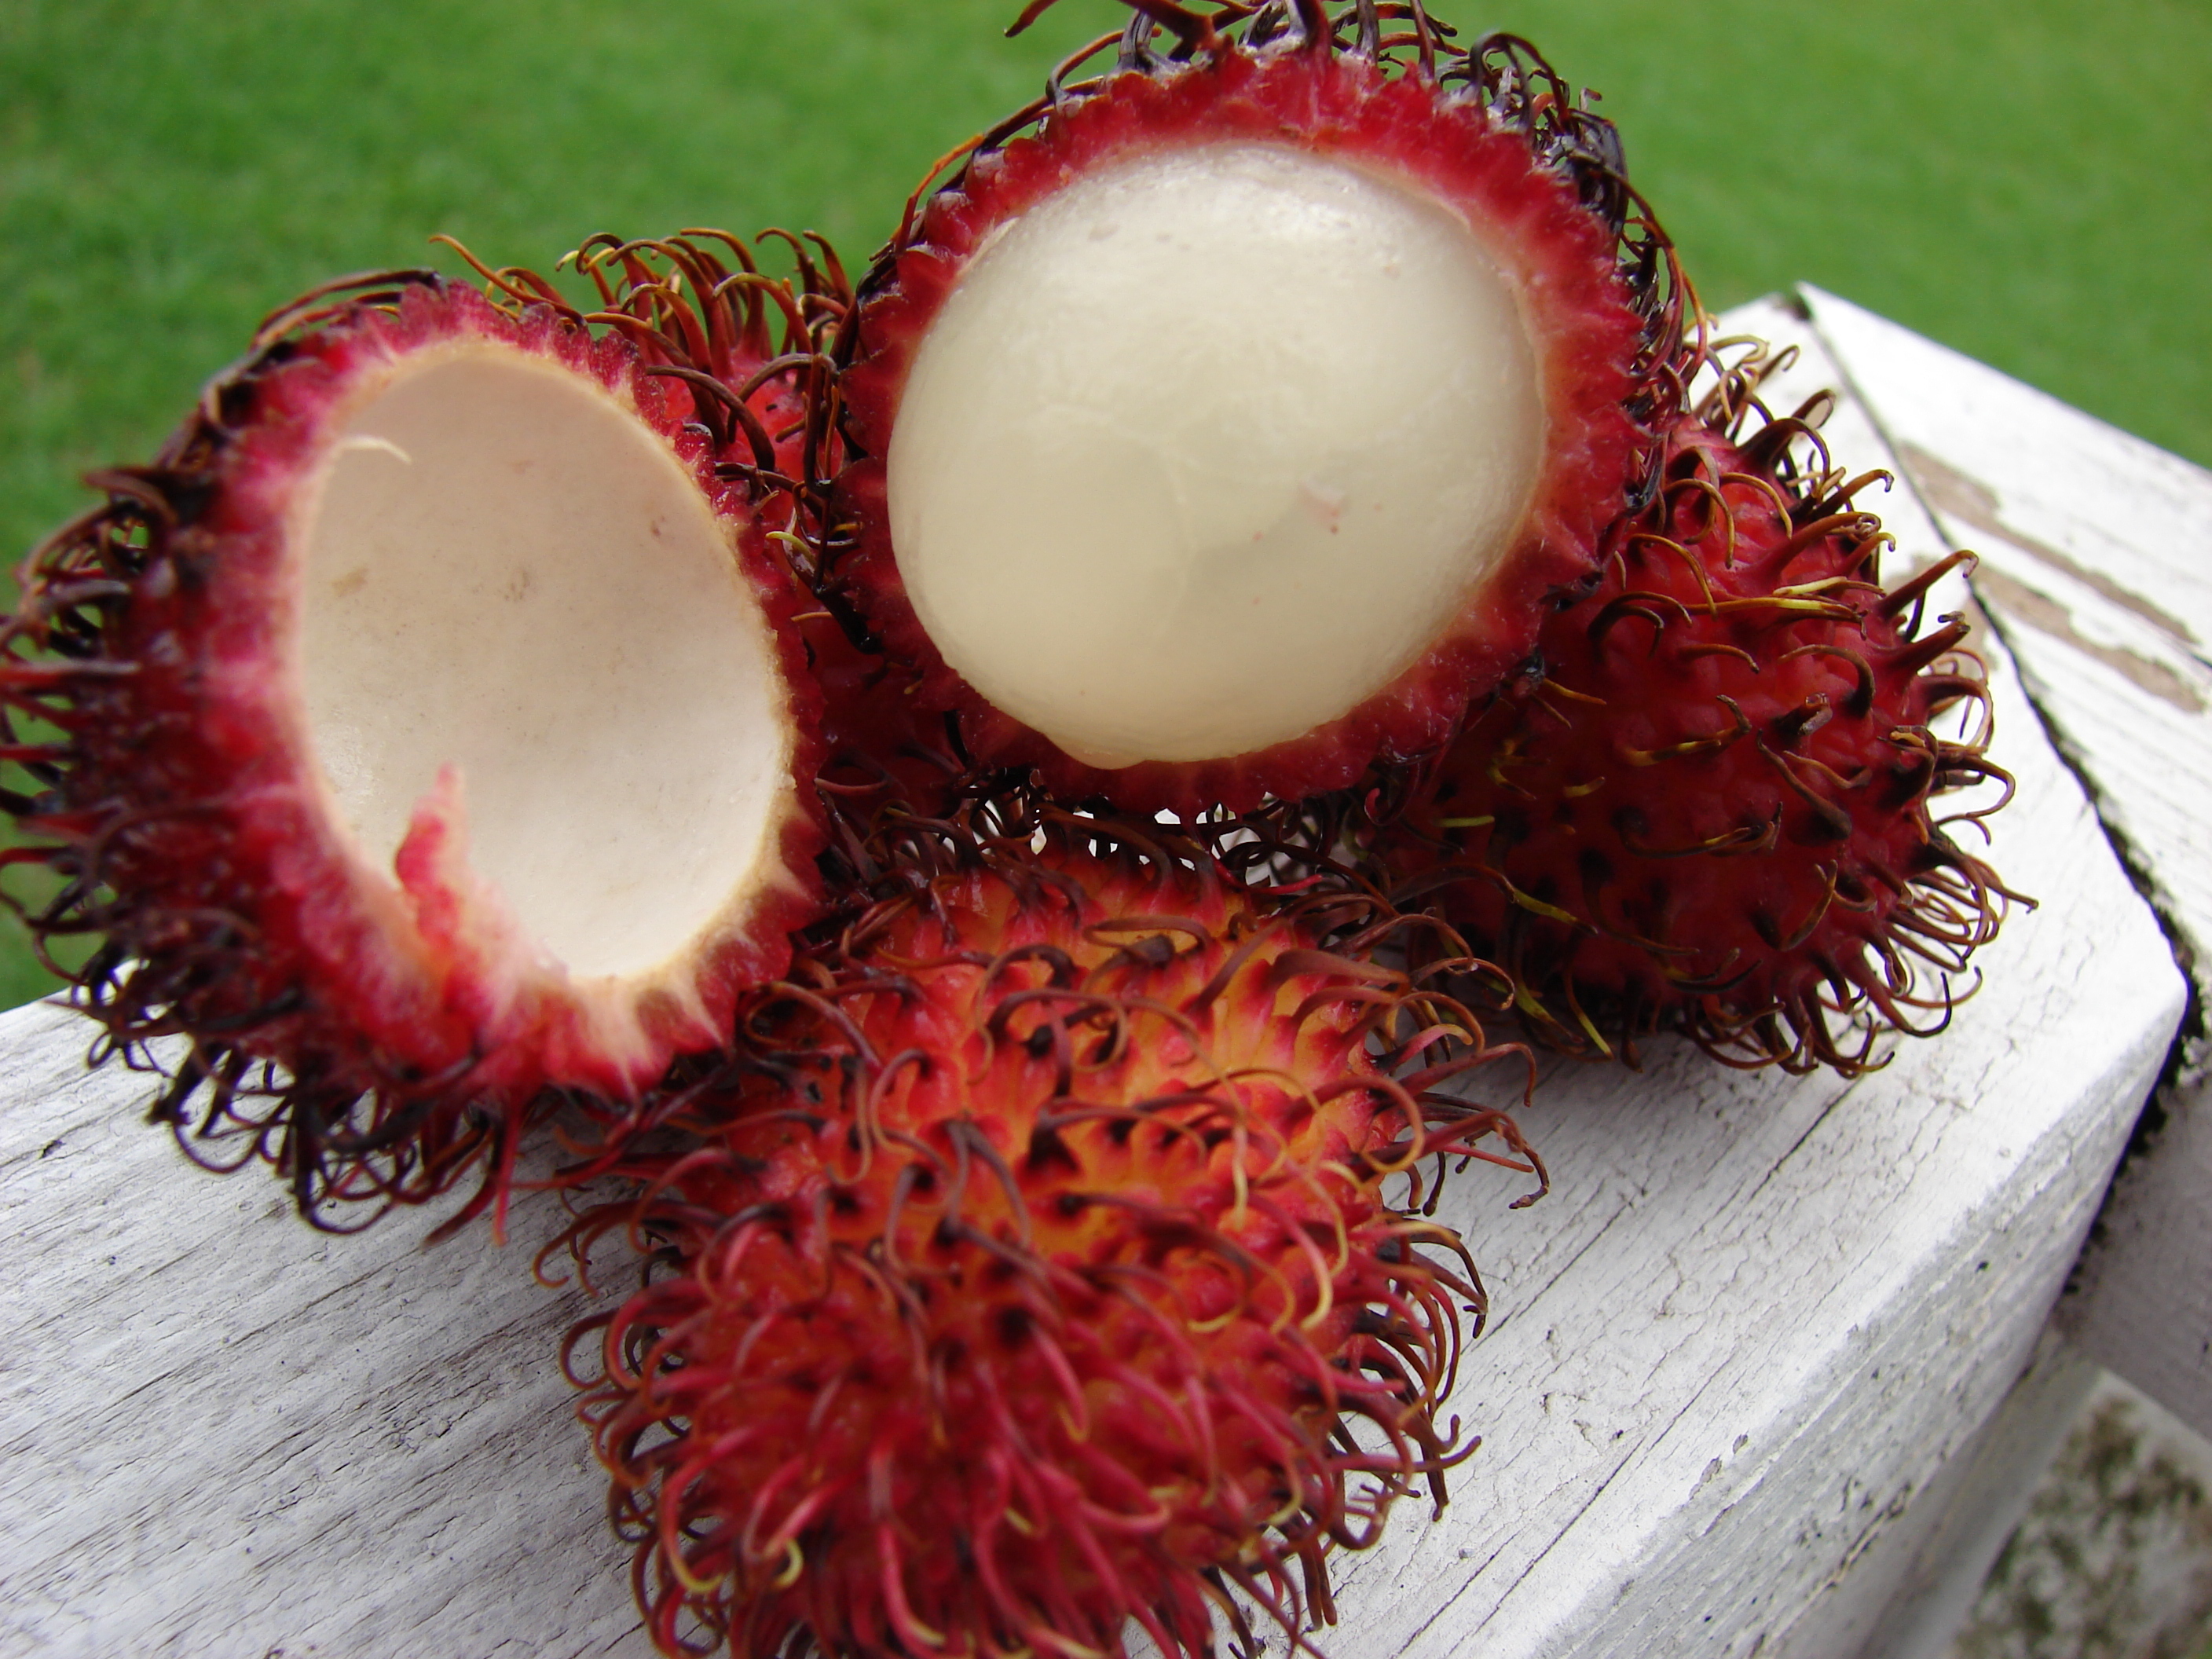 15 Strange Fruits And Vegetables Pictures Cbs News